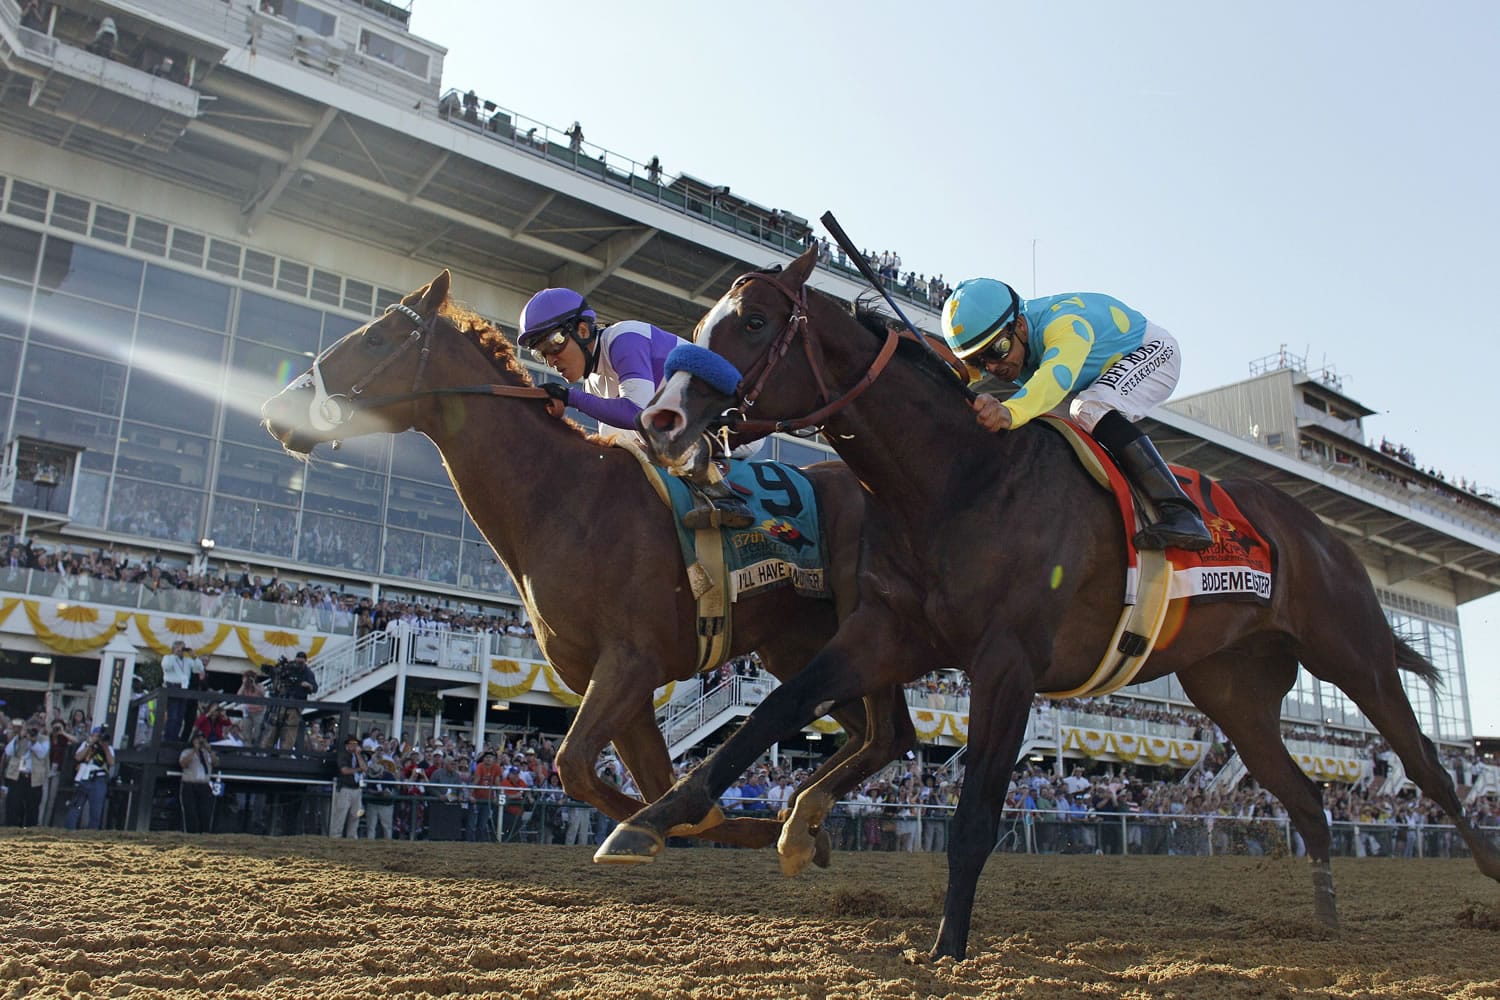 I'll Have Another (9), ridden by Mario Gutierrez, beats Bodemeister, ridden by Mike Smith, to the finish line to win the 137th Preakness Stakes horse race at Pimlico Race Course on Saturday in Baltimore.